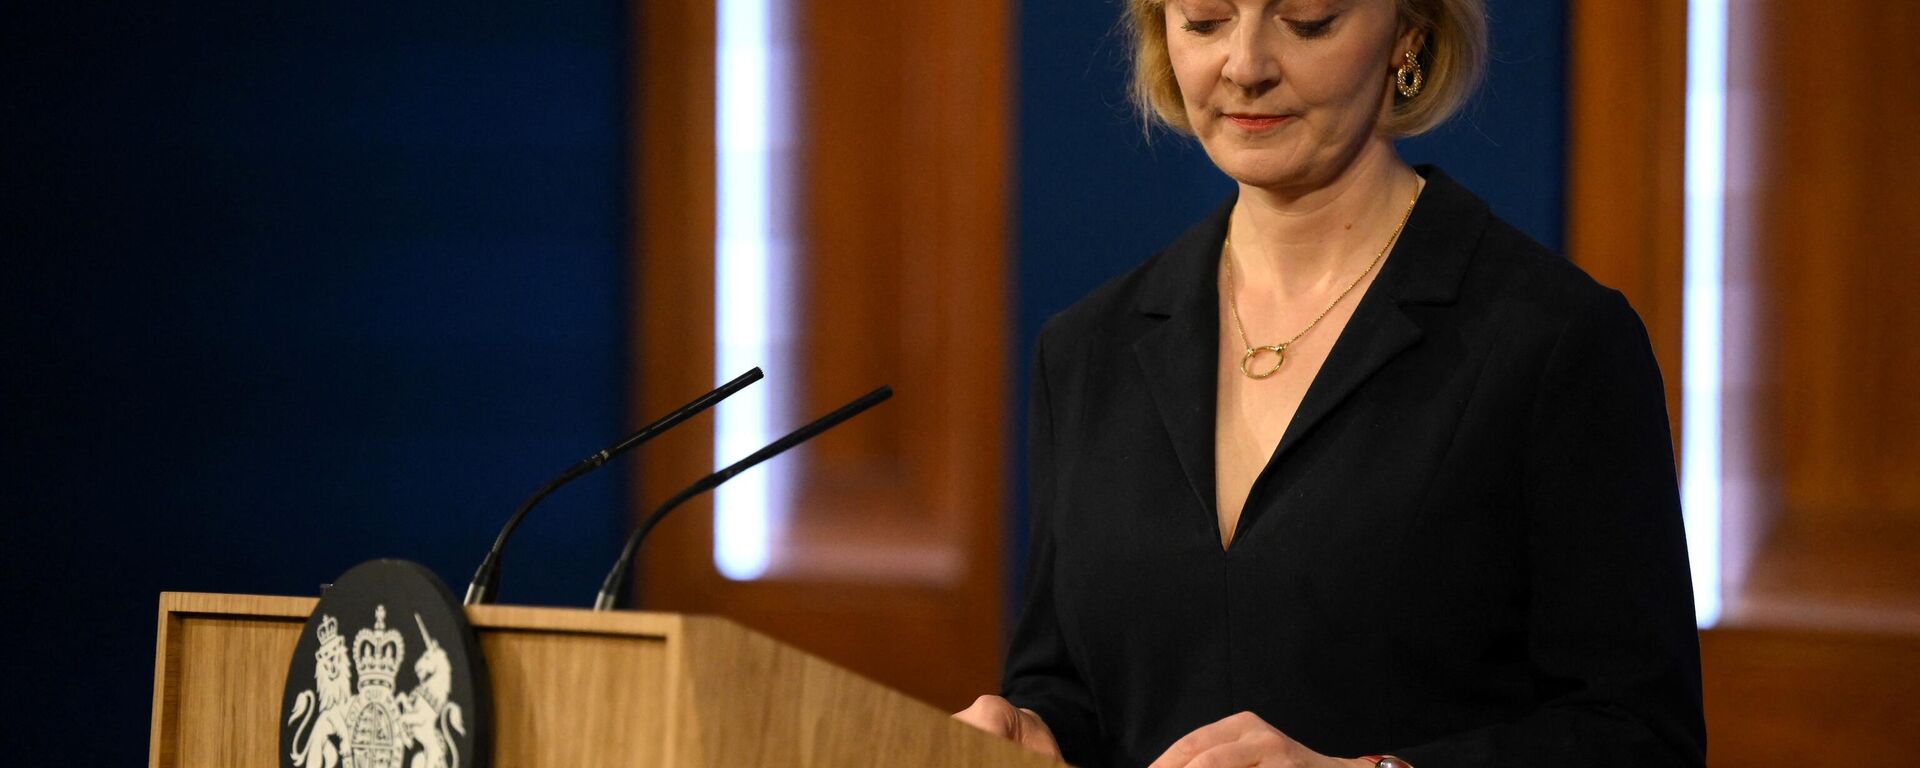 Britain's Prime Minister Liz Truss looks down during a press conference in the Downing Street Briefing Room in central London on October 14, 2022 - Sputnik International, 1920, 15.10.2022